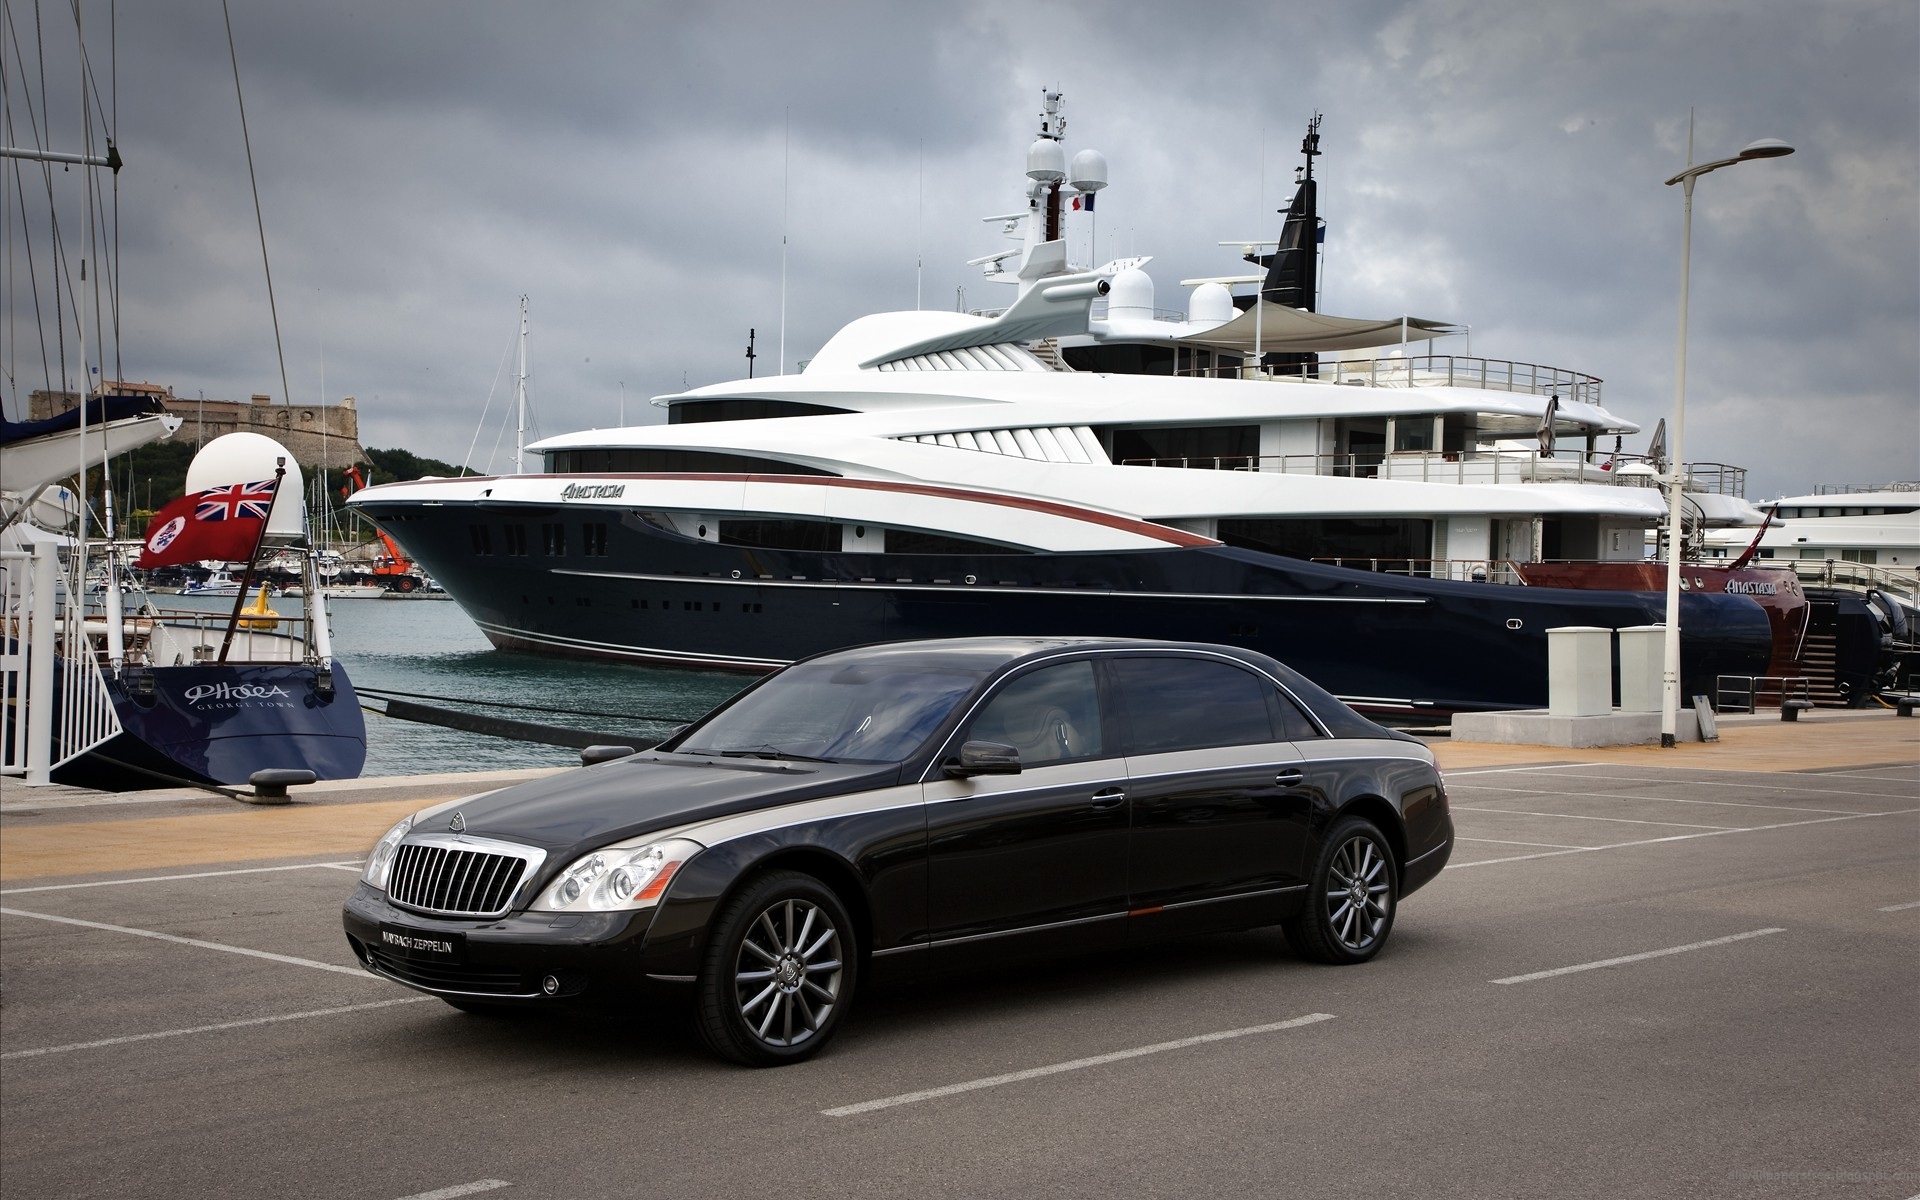 Vehicles Maybach Zeppelin HD Wallpaper | Background Image